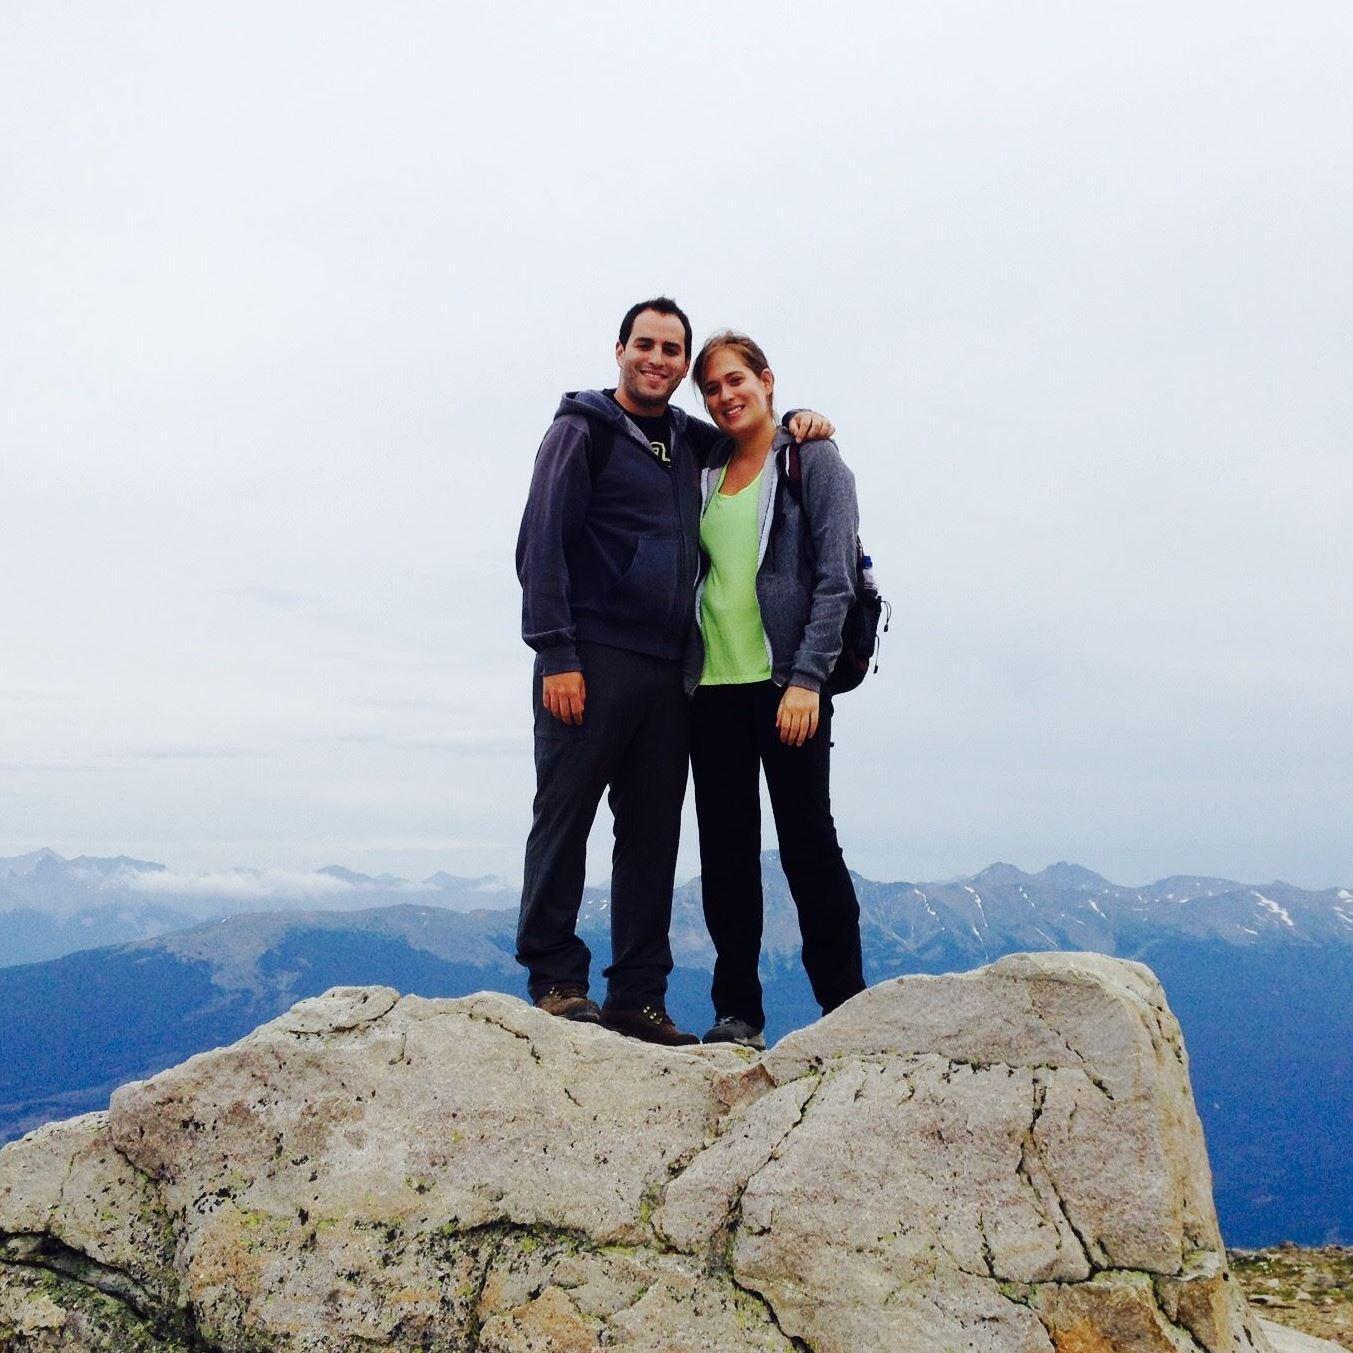 June 2015: Family trip to Canada